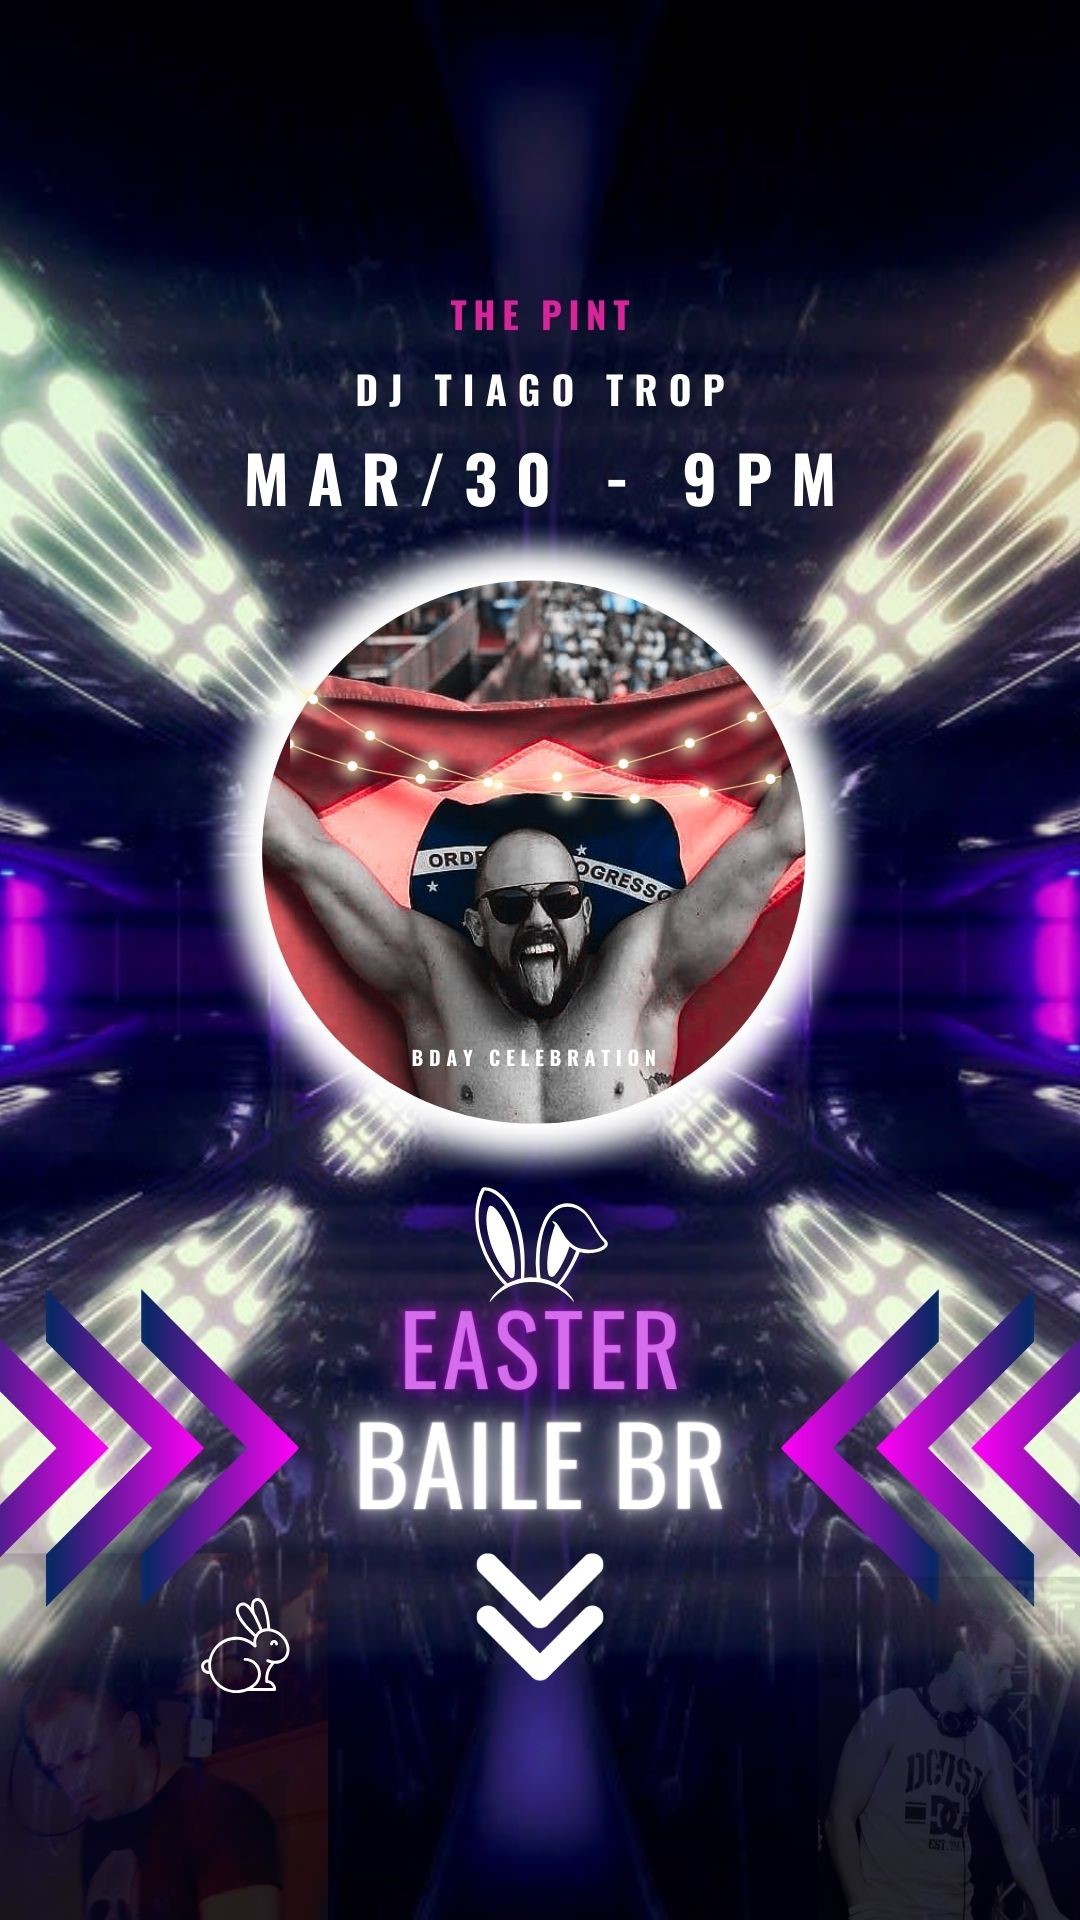 EASTER BAILE BR  on Mar 30, 21:00@The Pint Public House - Buy tickets and Get information on BR Beat Mix 